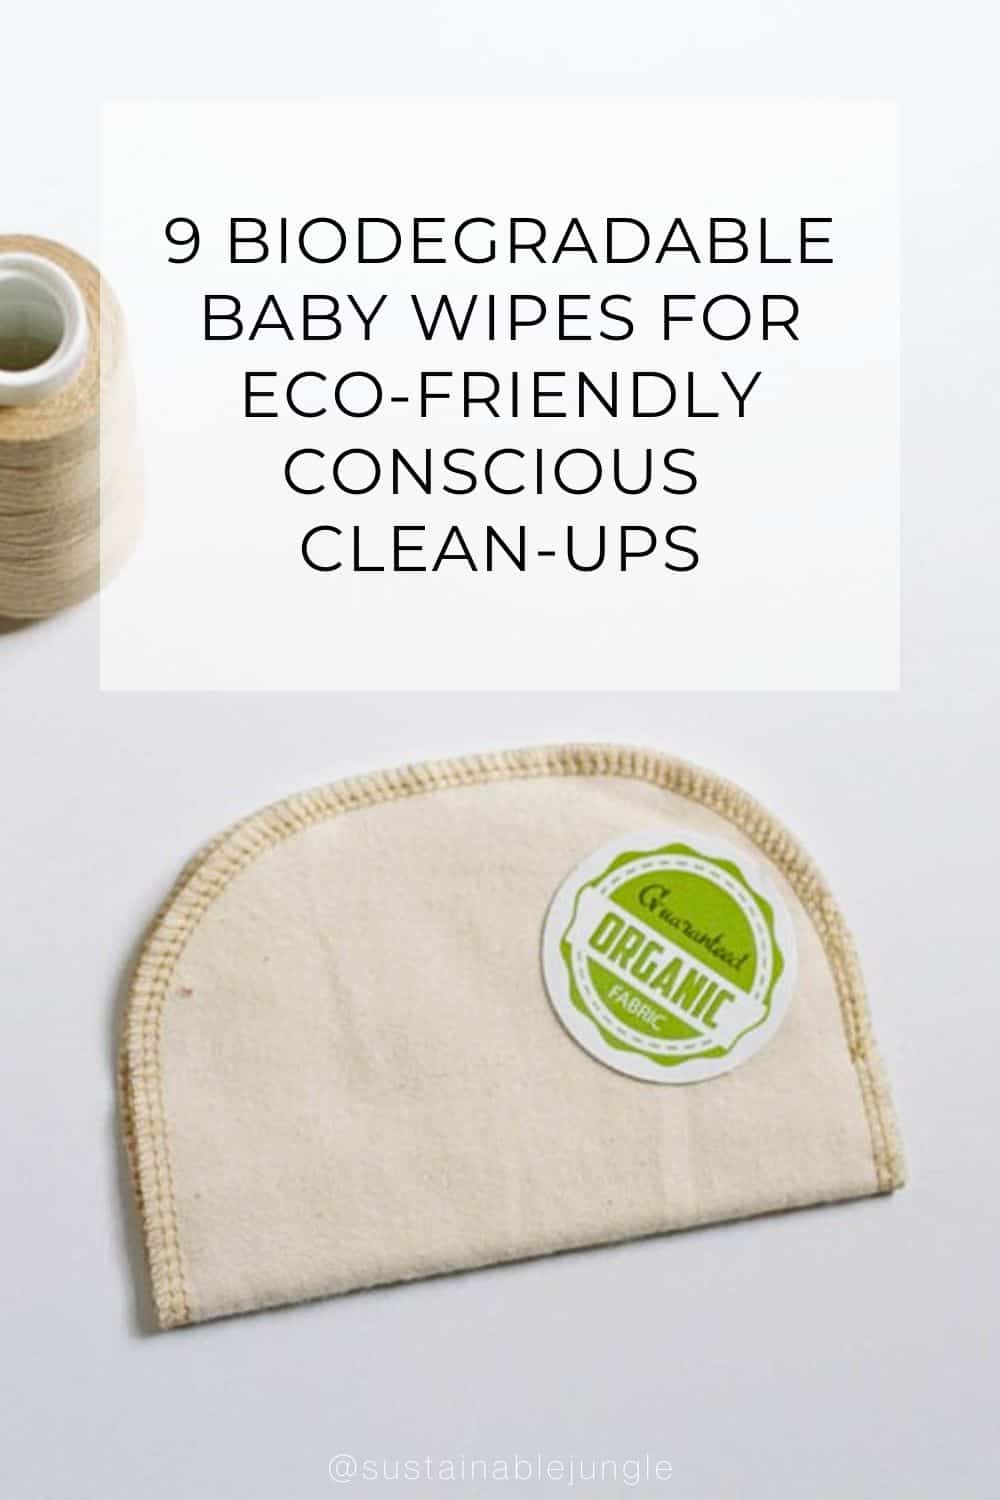 9 Biodegradable Baby Wipes For Eco-Friendly Conscious Clean-Ups Image by Creekside Kid #biodegradablebabywipes #arebabywipesbiodegradable #biodegradablewipesbaby #ecofriendlybabywipes #bestecofriendlybabywipes #ecofriendlyalternativetobabywipes #sustainablejungle